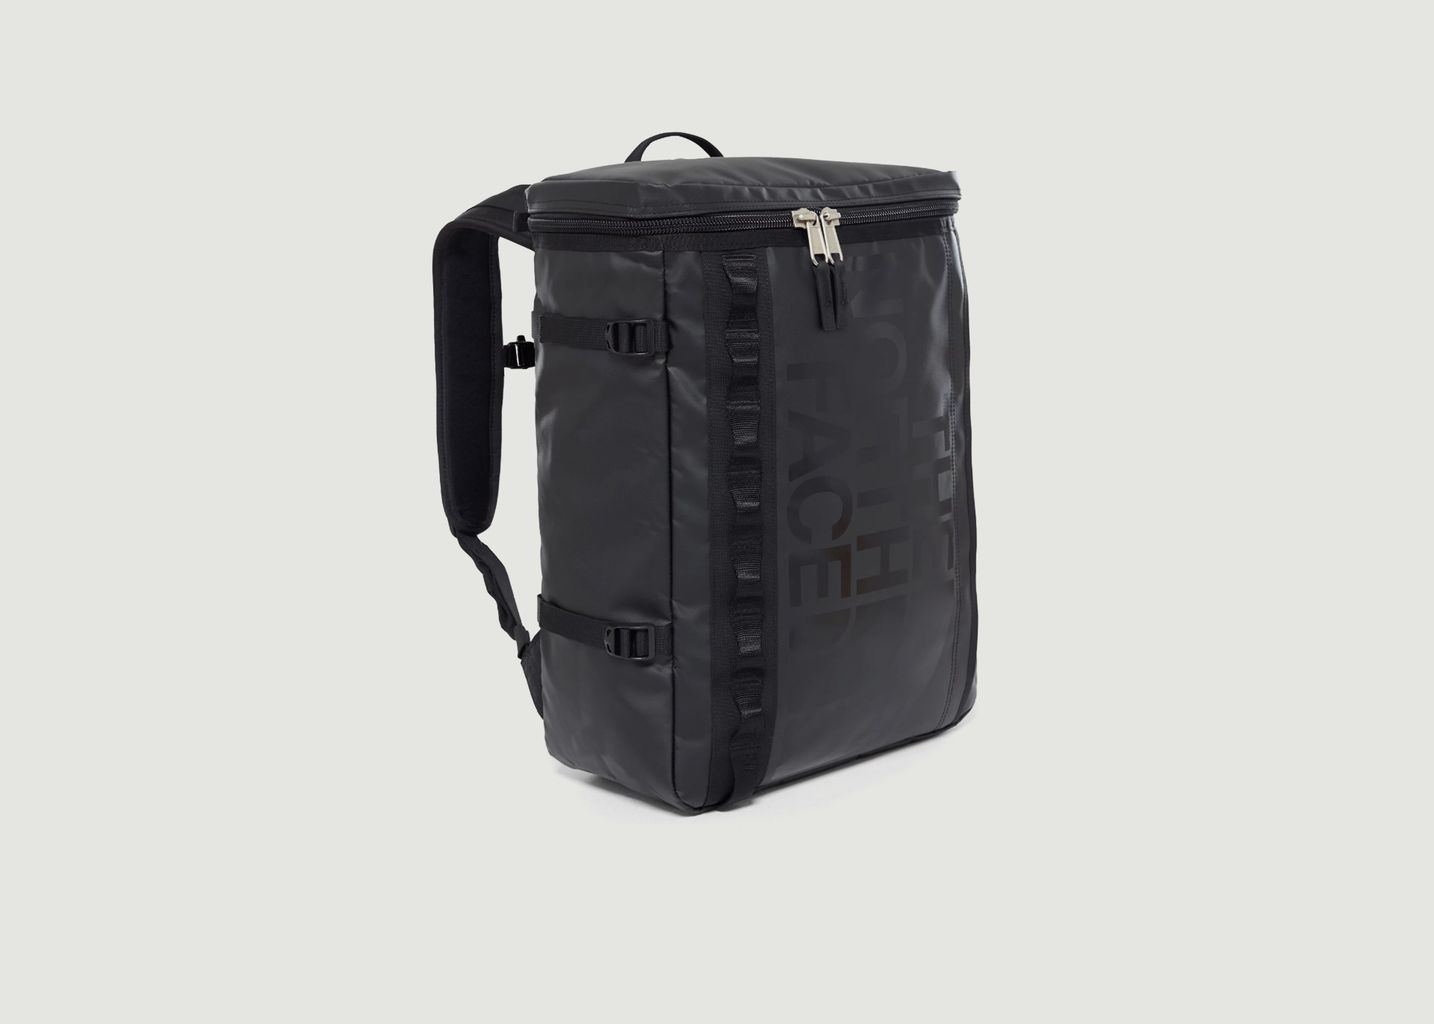 Base Camp Travel Bag - The North Face